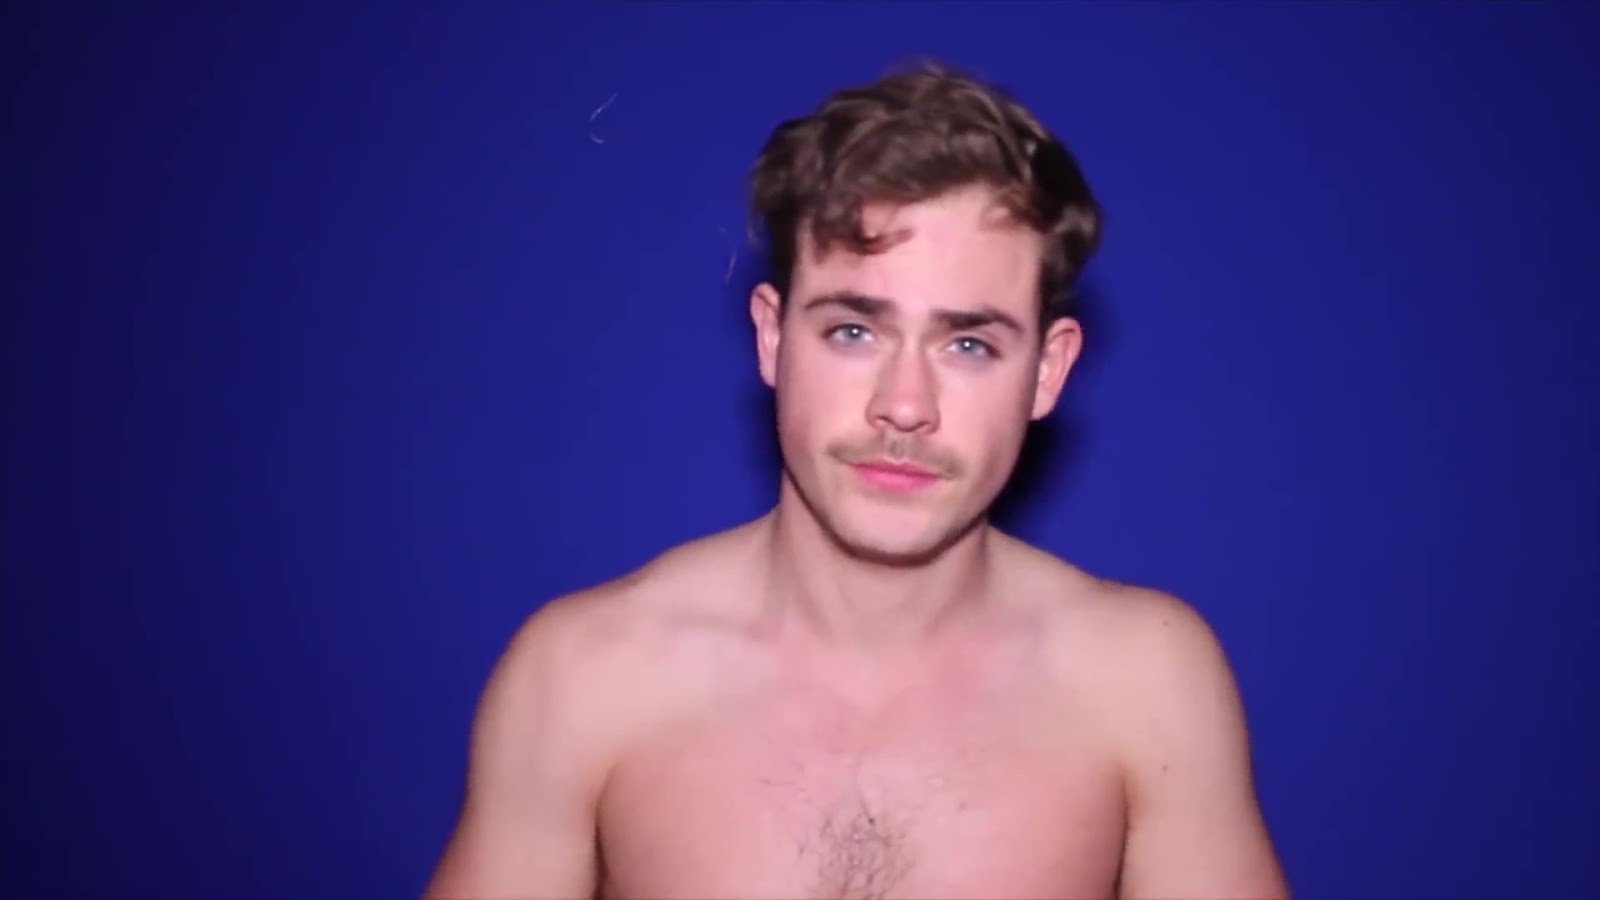 Dacre Montgomery shirtless in Stranger Things audition video.